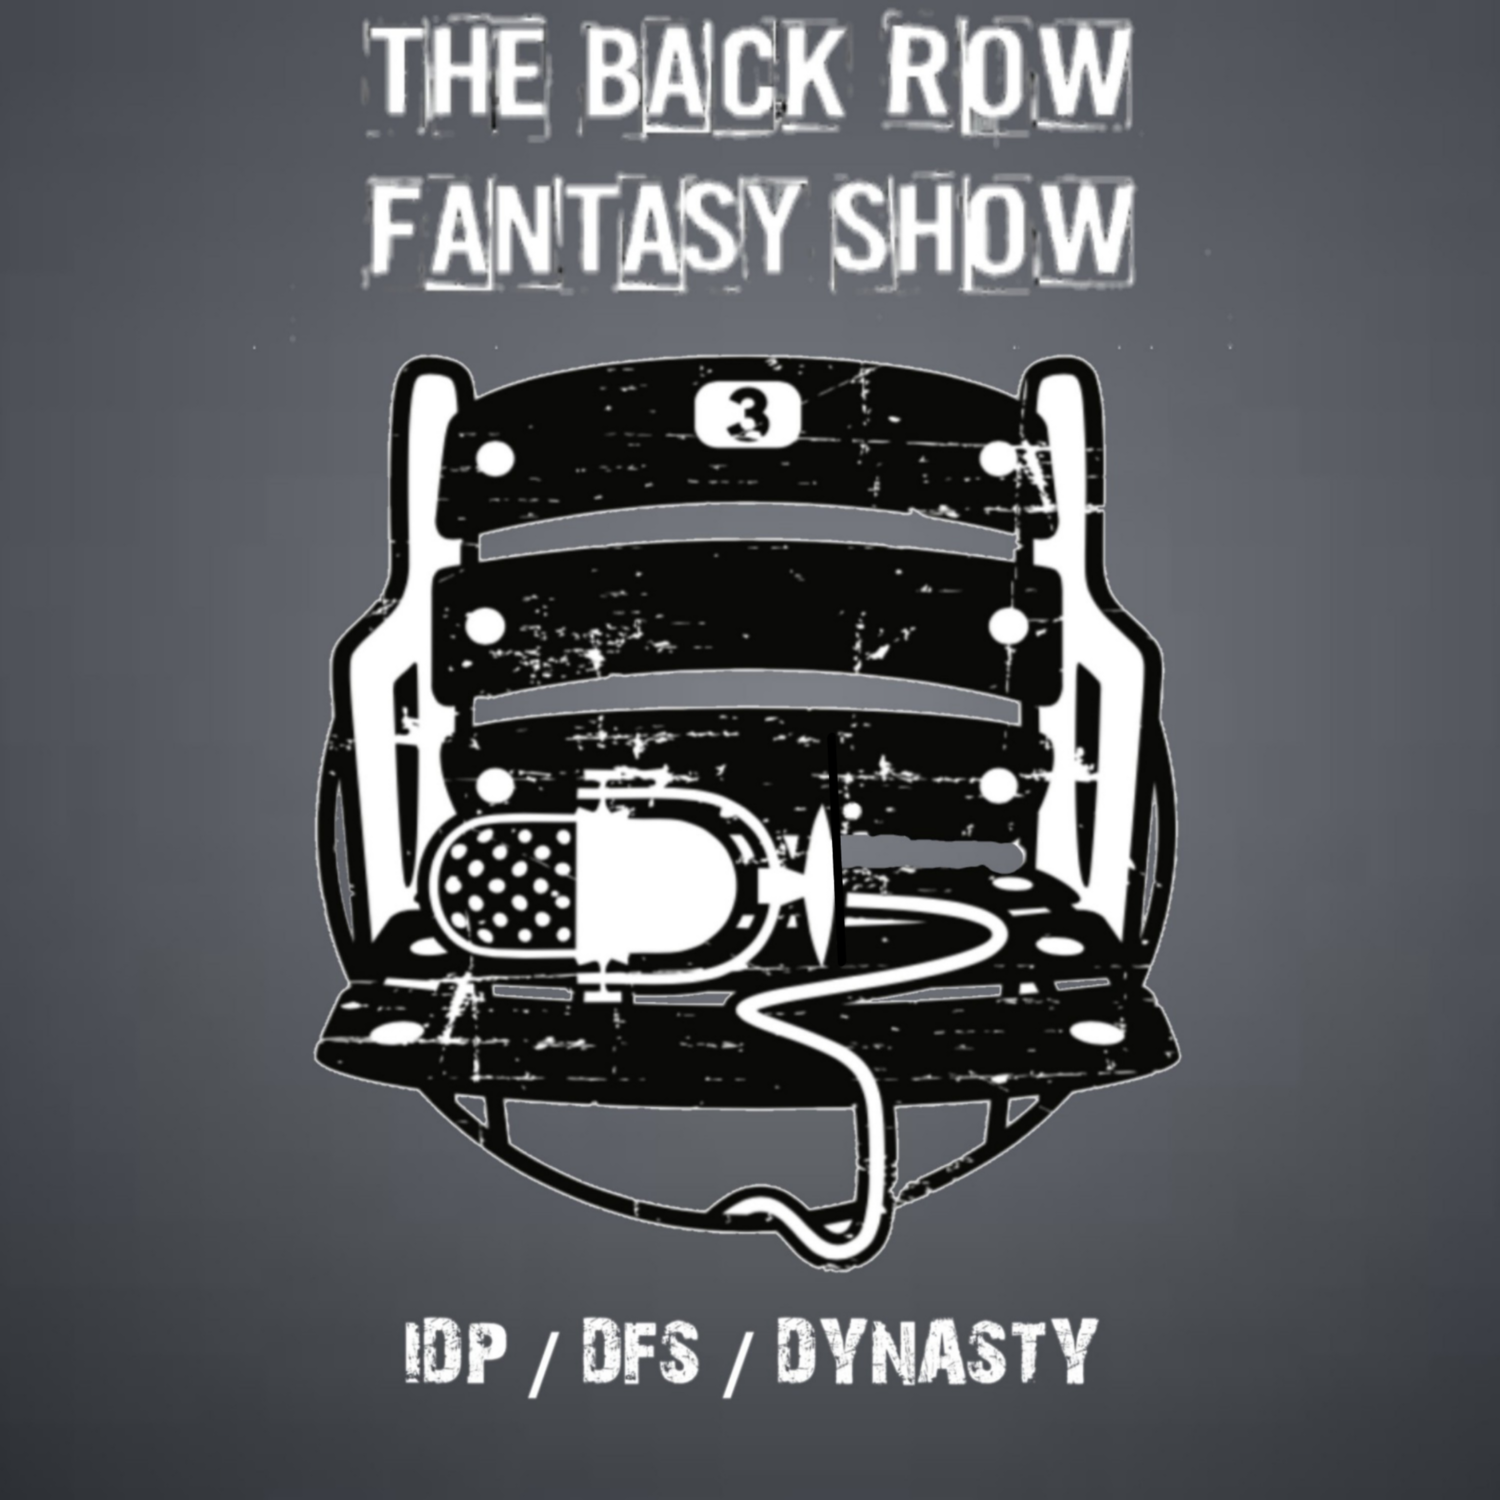 Episode 51:  IDP Rookies vs Veterans in startups!  Lebron James and the NBA!  Listener Q&A!